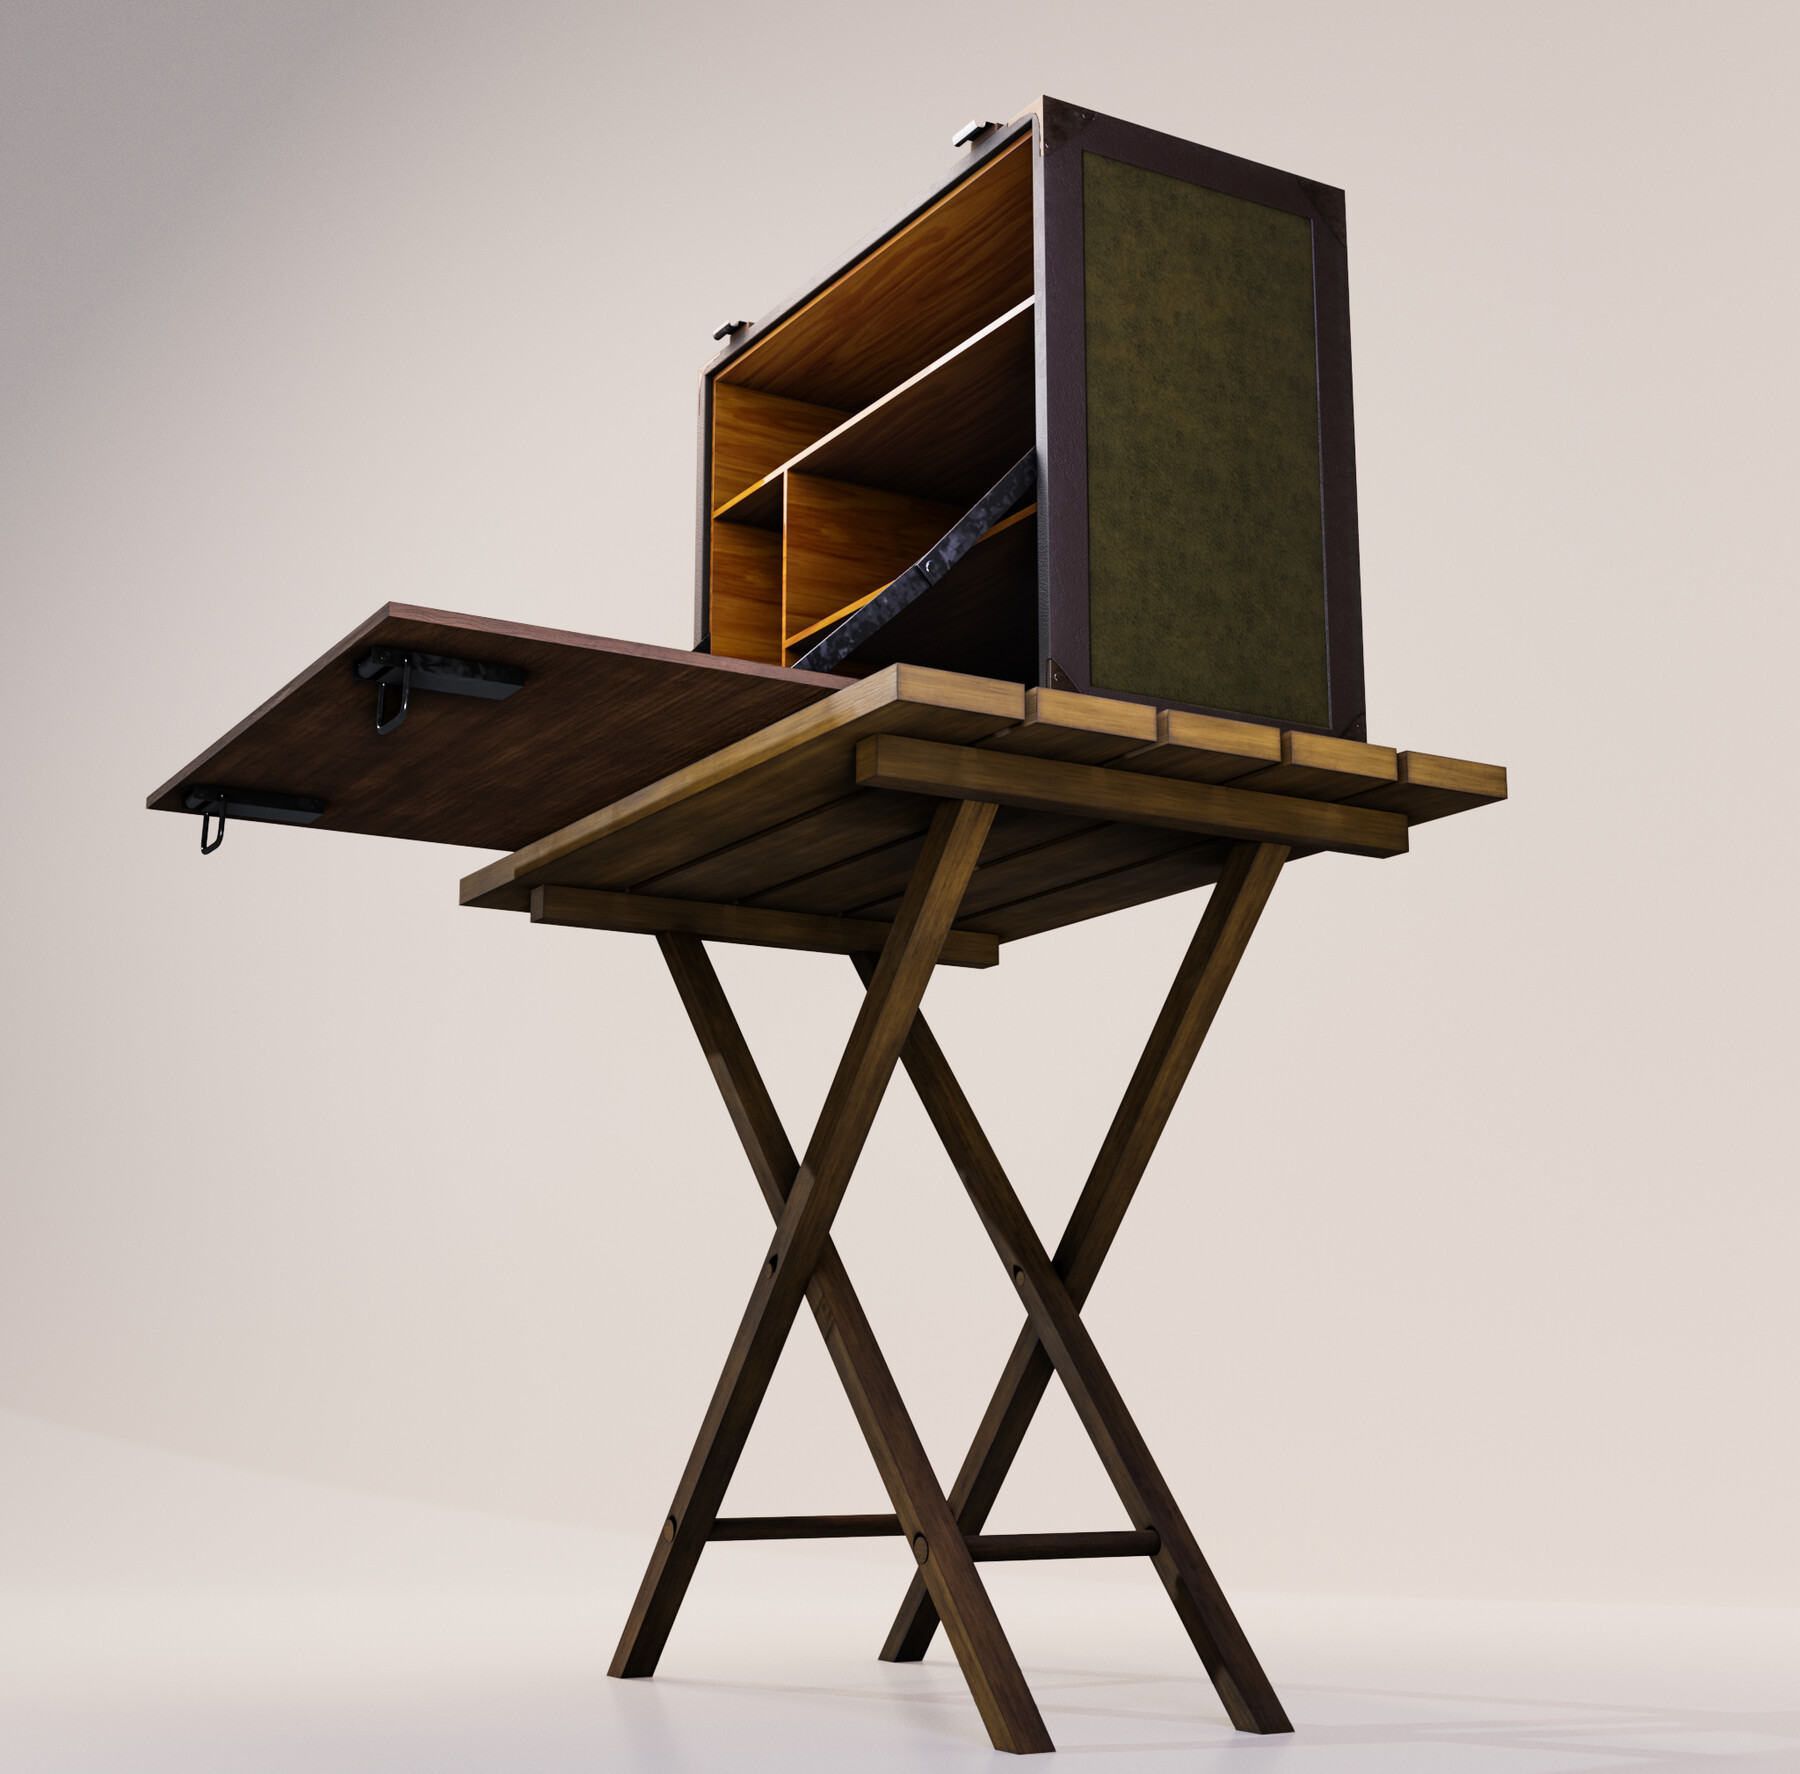 ArtStation - The camp bed trunk with mattress